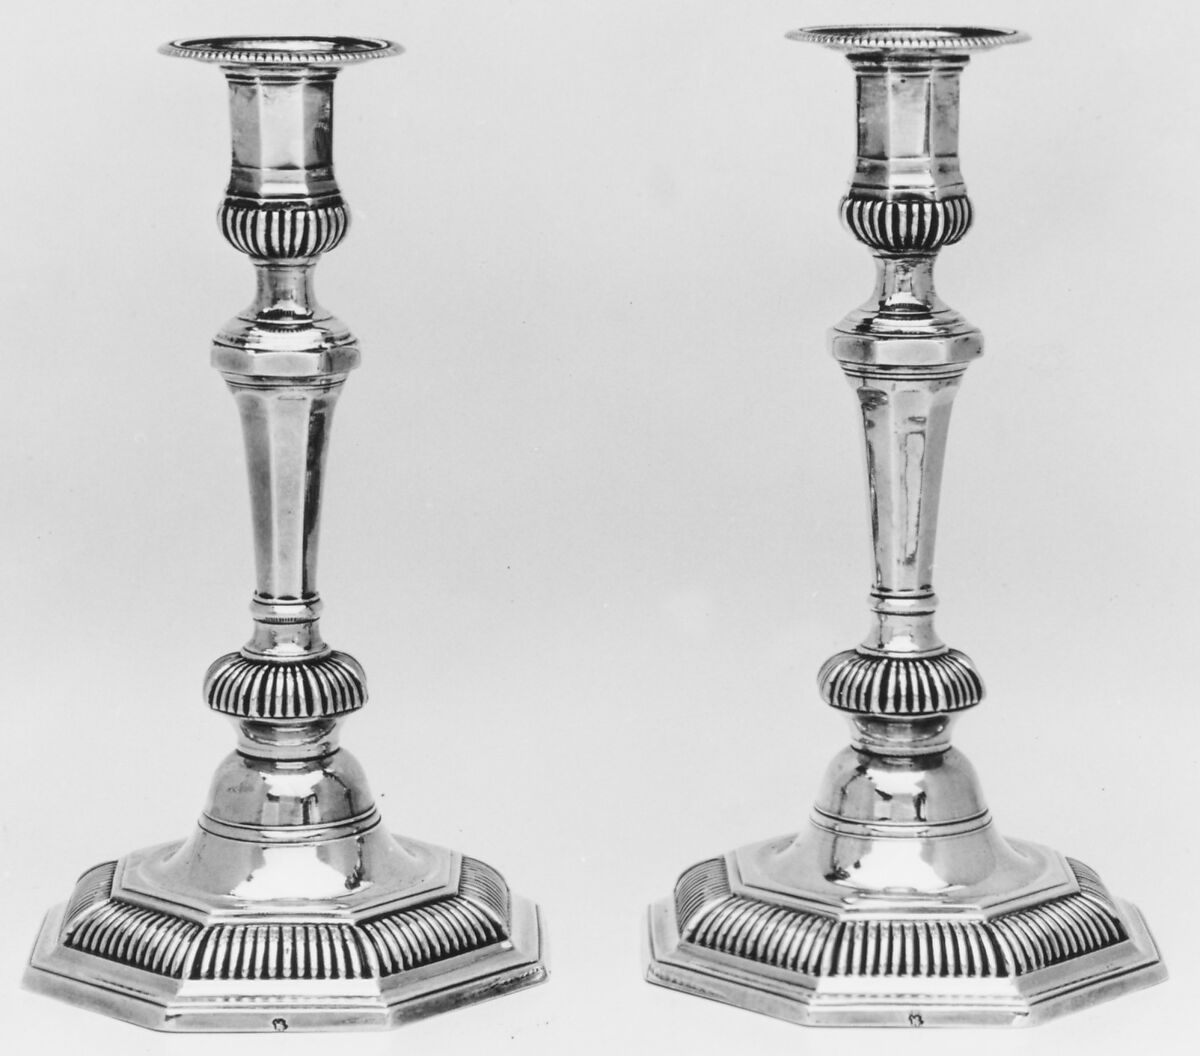 Pair of candlesticks, Antoine Plot (French, 1701–1772, master 1729), Silver, French, Paris 